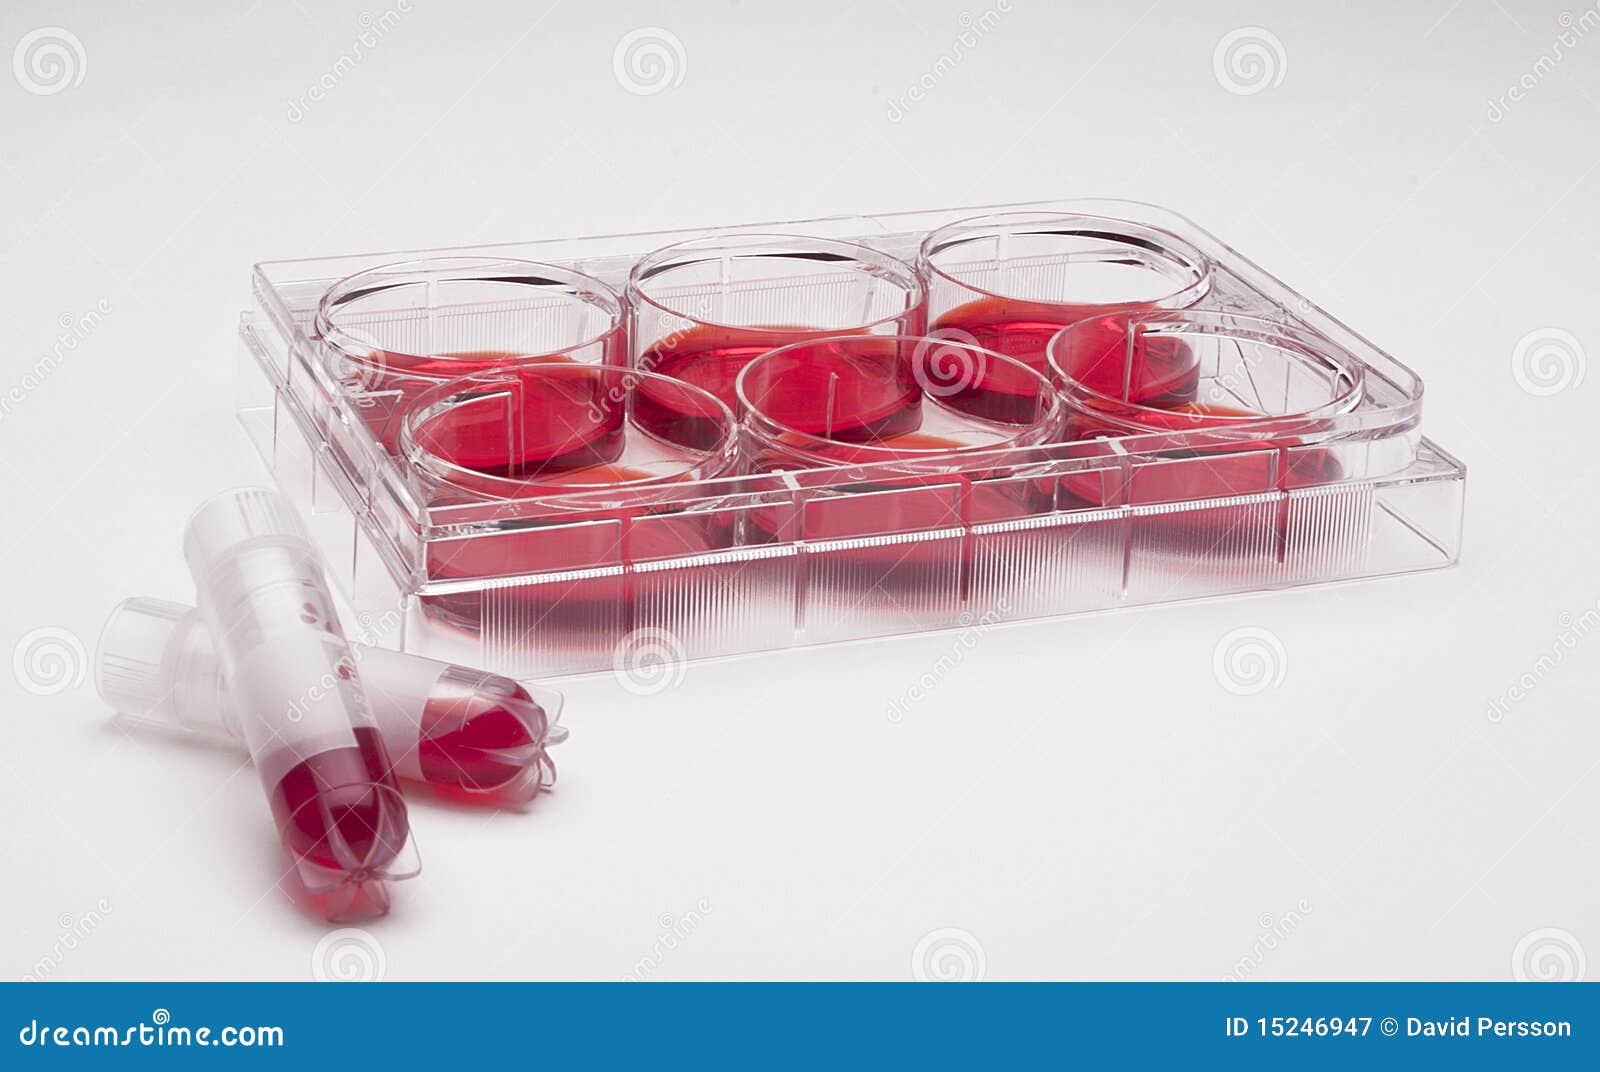 cell culture lab supplies